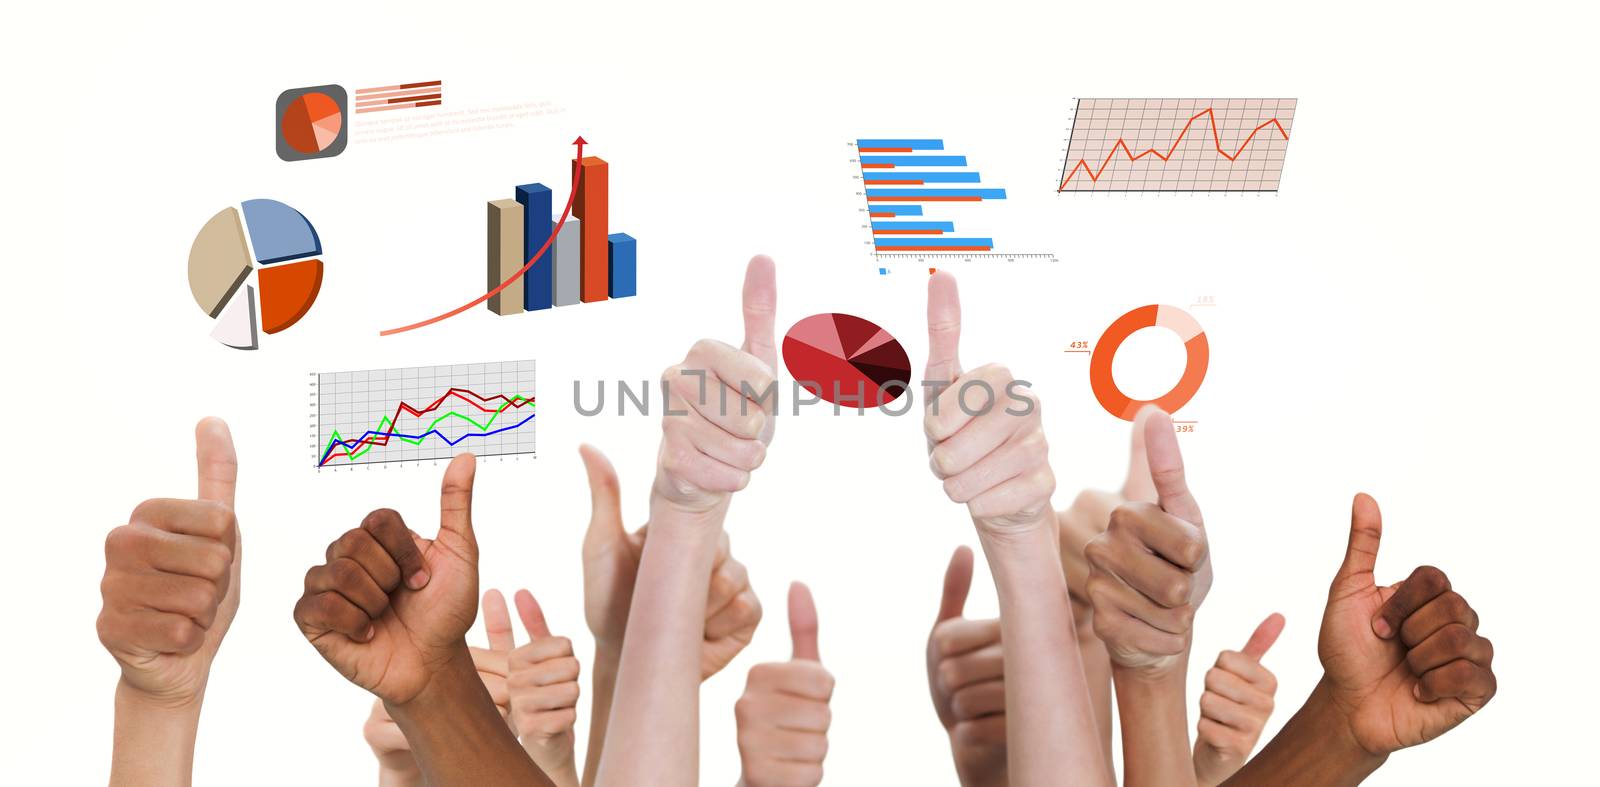 Hands showing thumbs up against graphs and charts